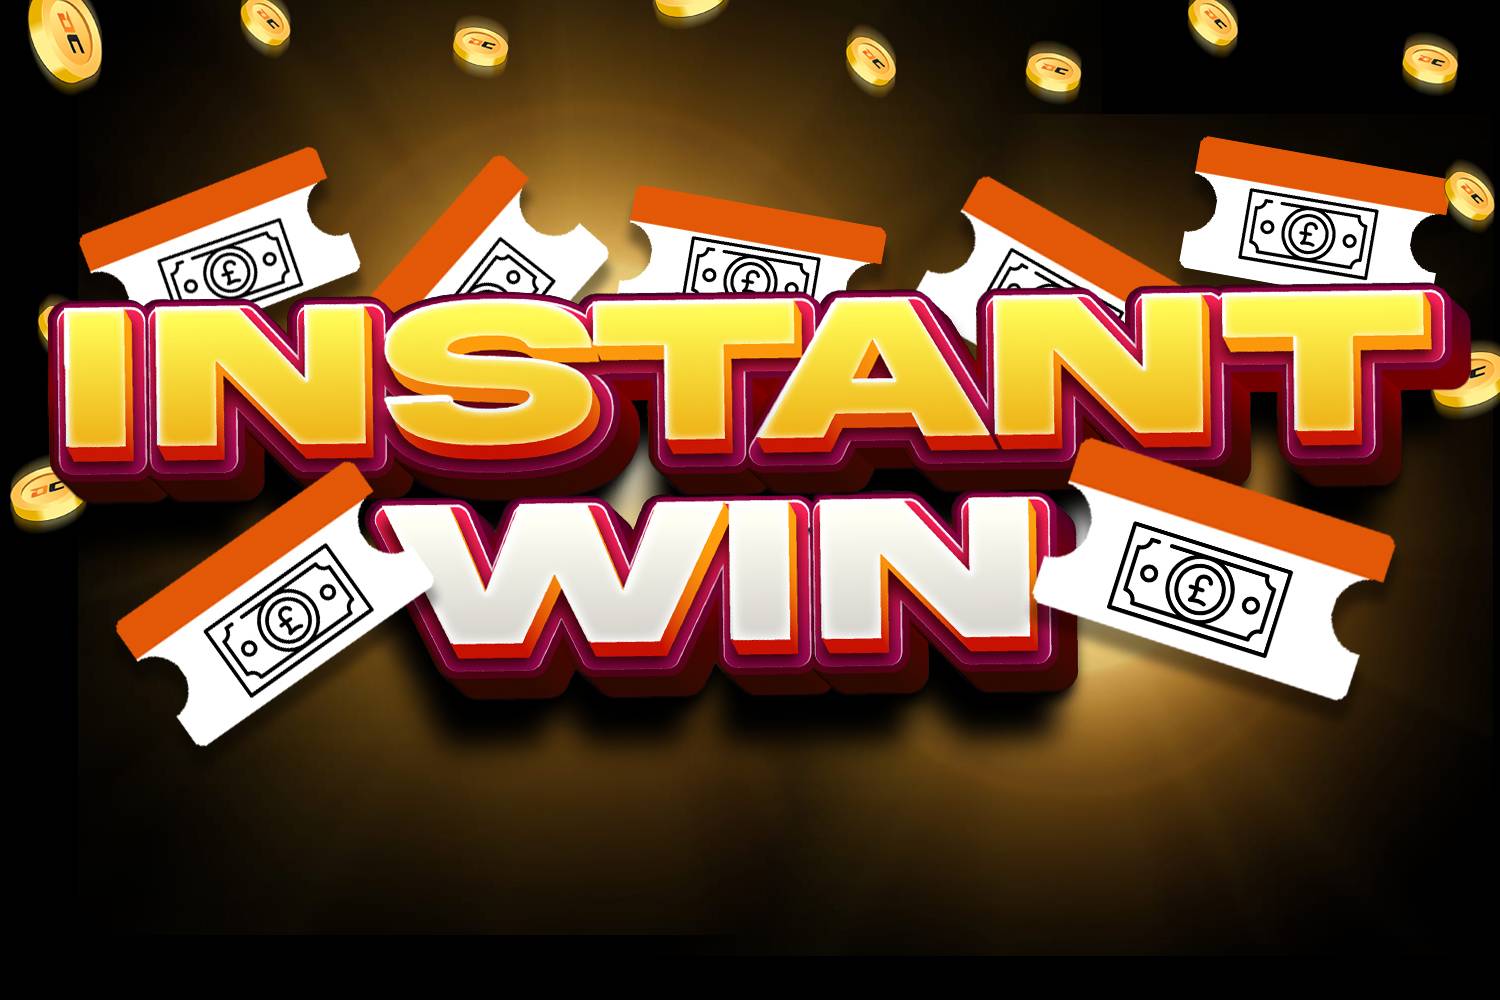 Win CASH Instantly - 1100 Instant Wins